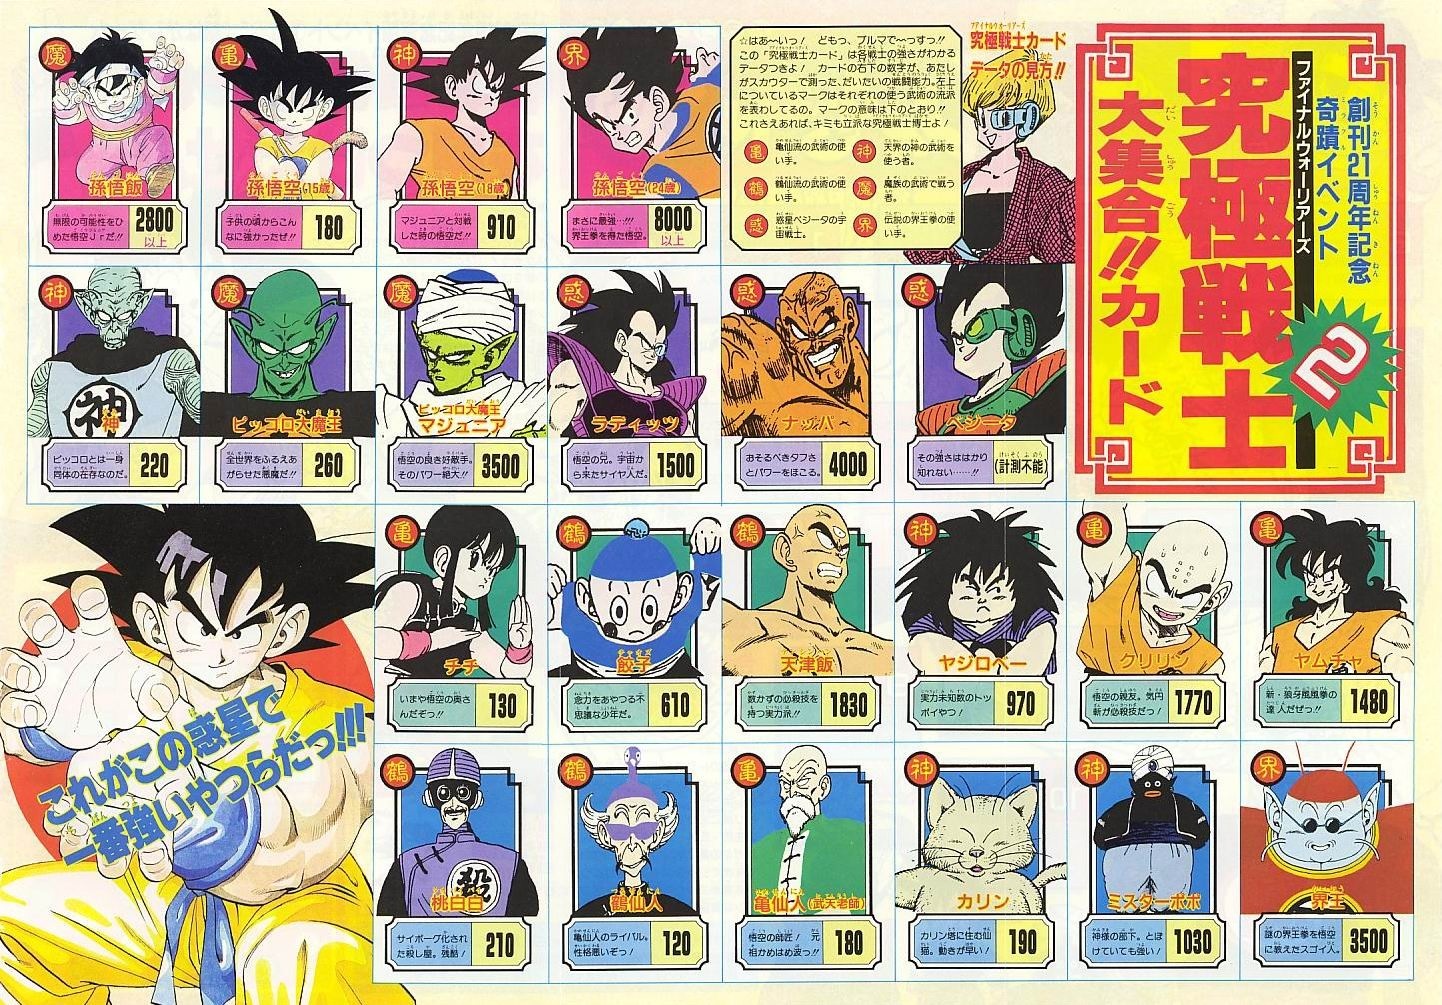 All Power Levels of Dragon Ball Multiverse l Part 1 